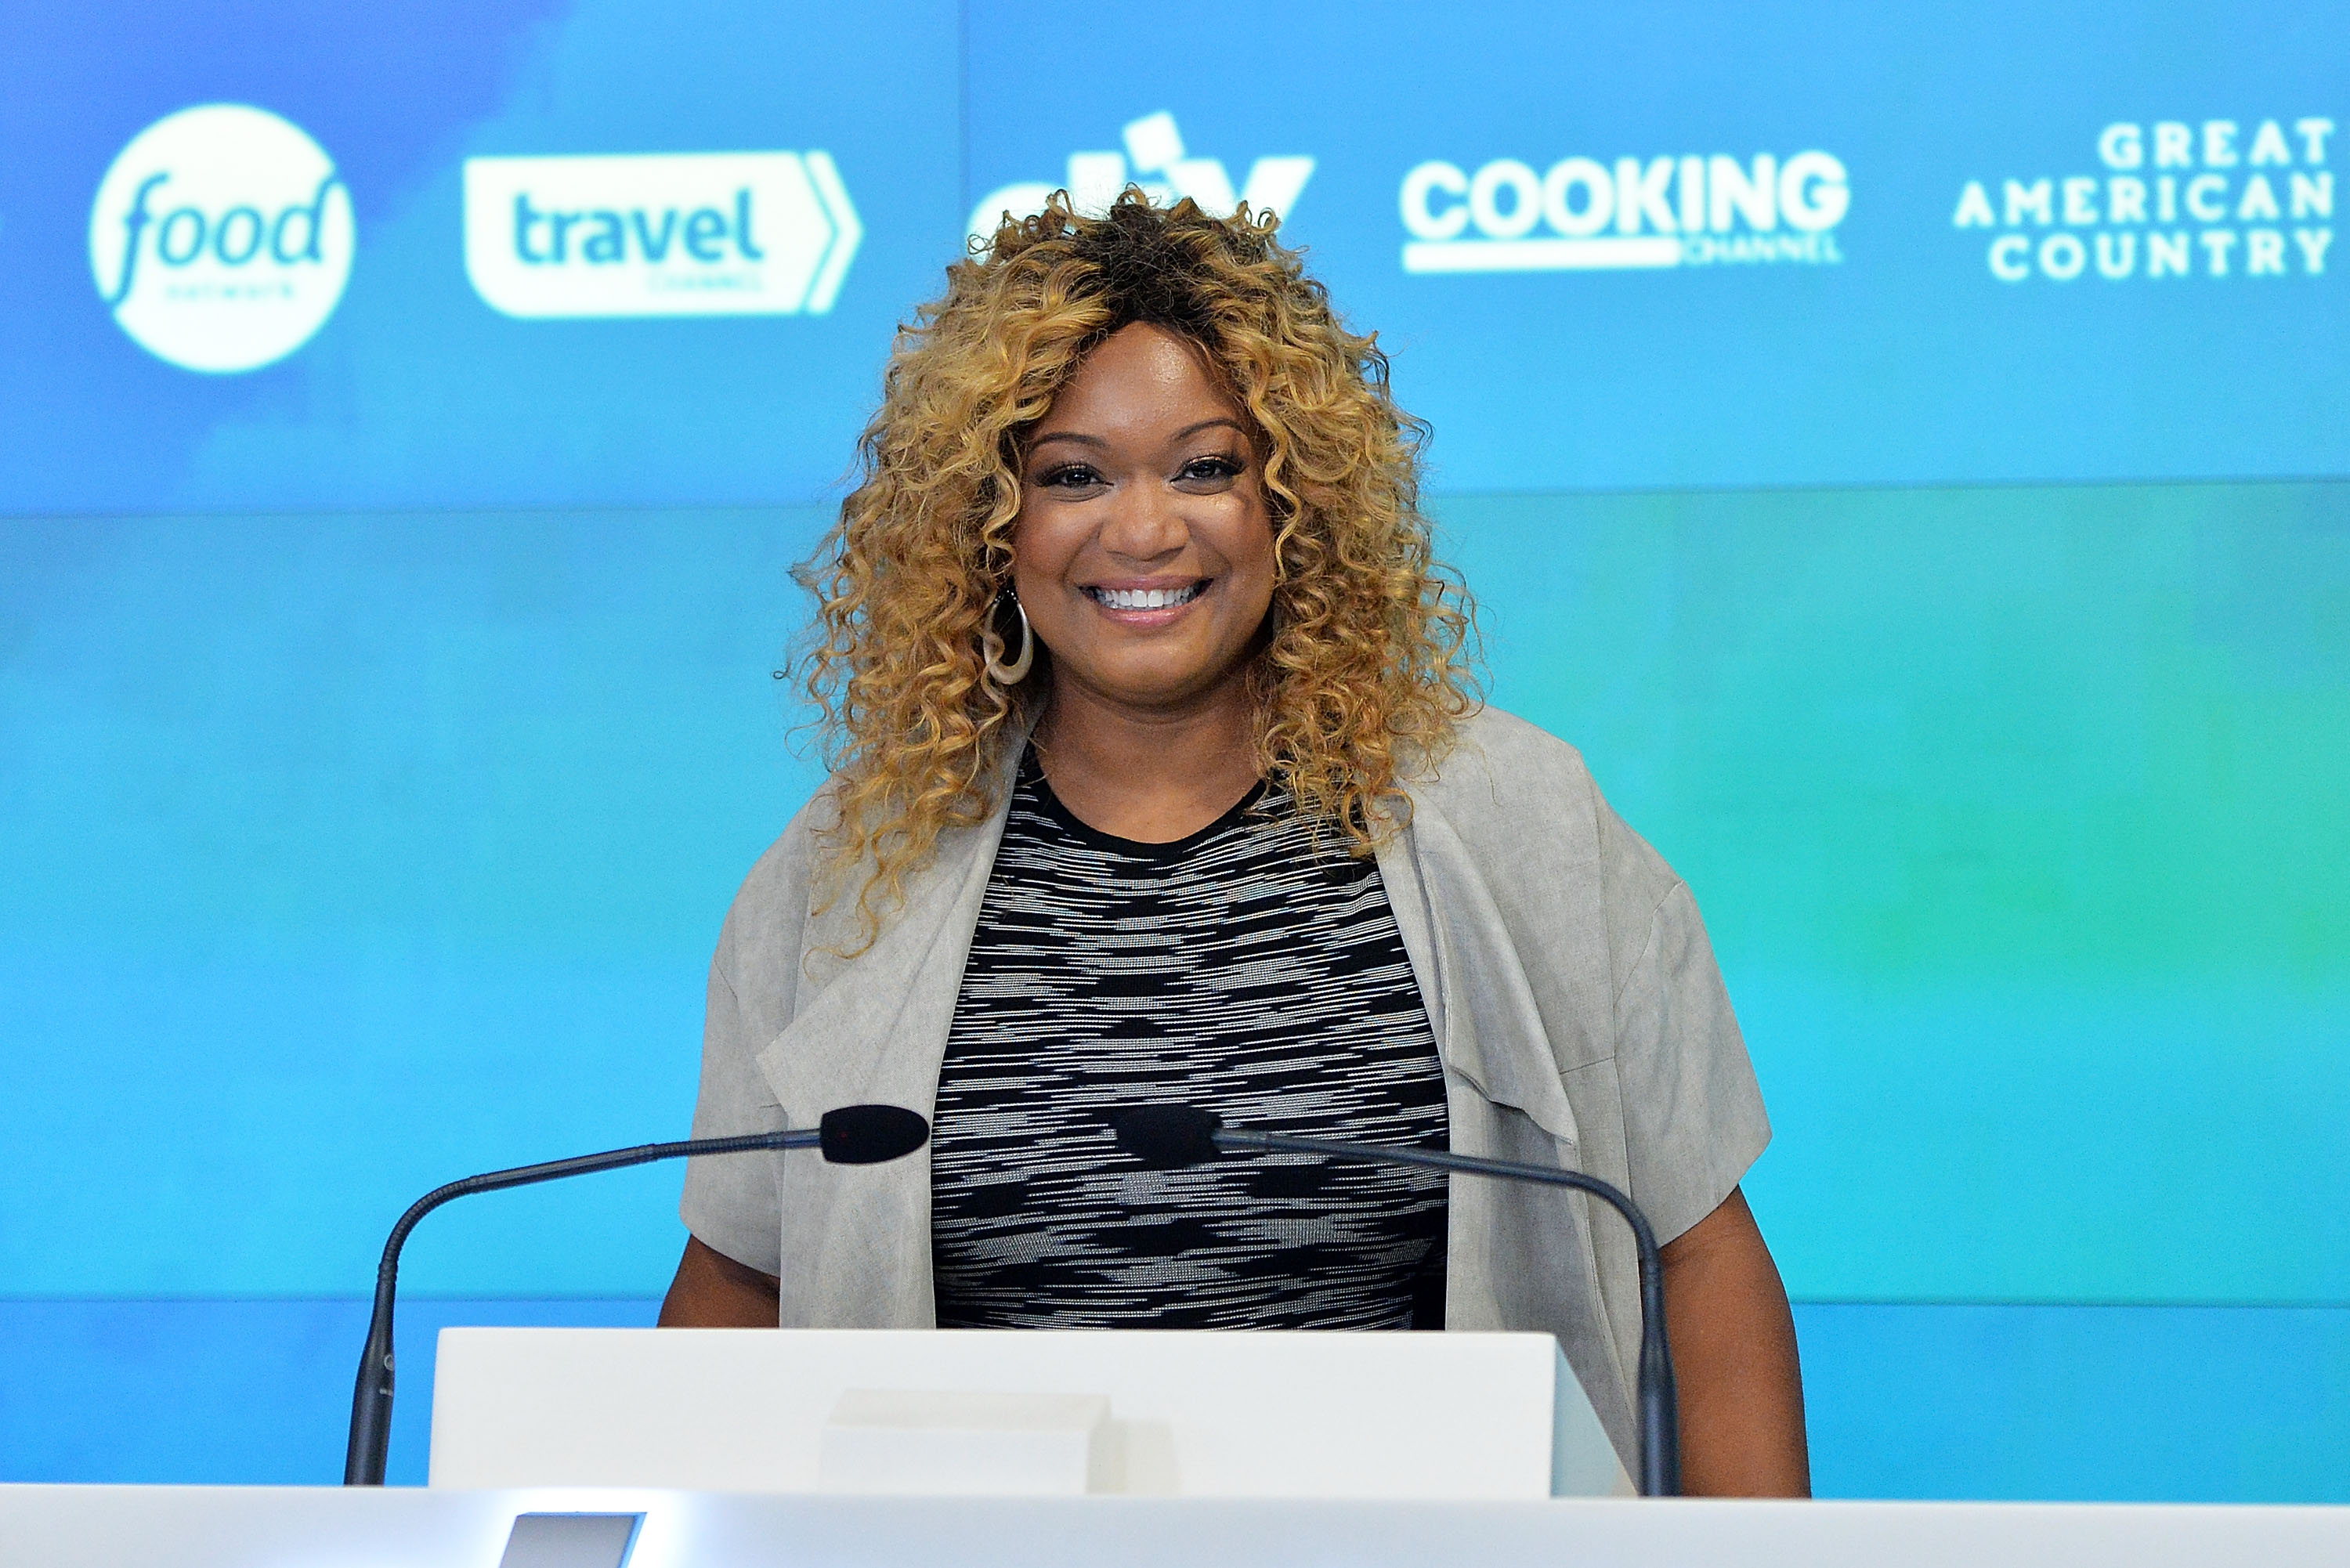 Celebrity chef Sunny Anderson wears a short-sleeved gray jacket in this photograph.